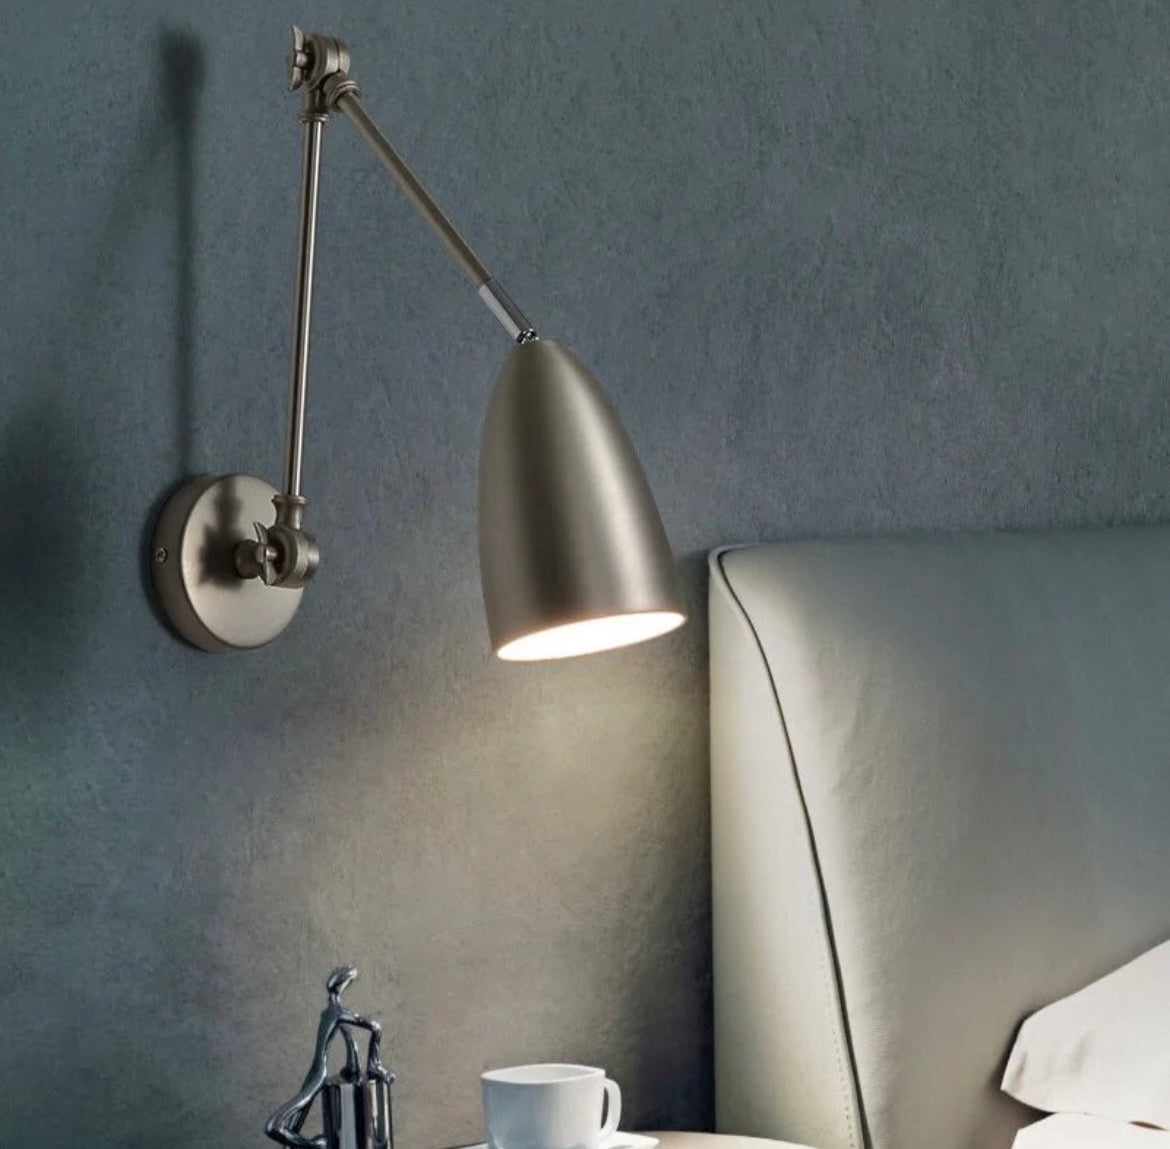 Silver Industrial Retro Extendable Wall Light